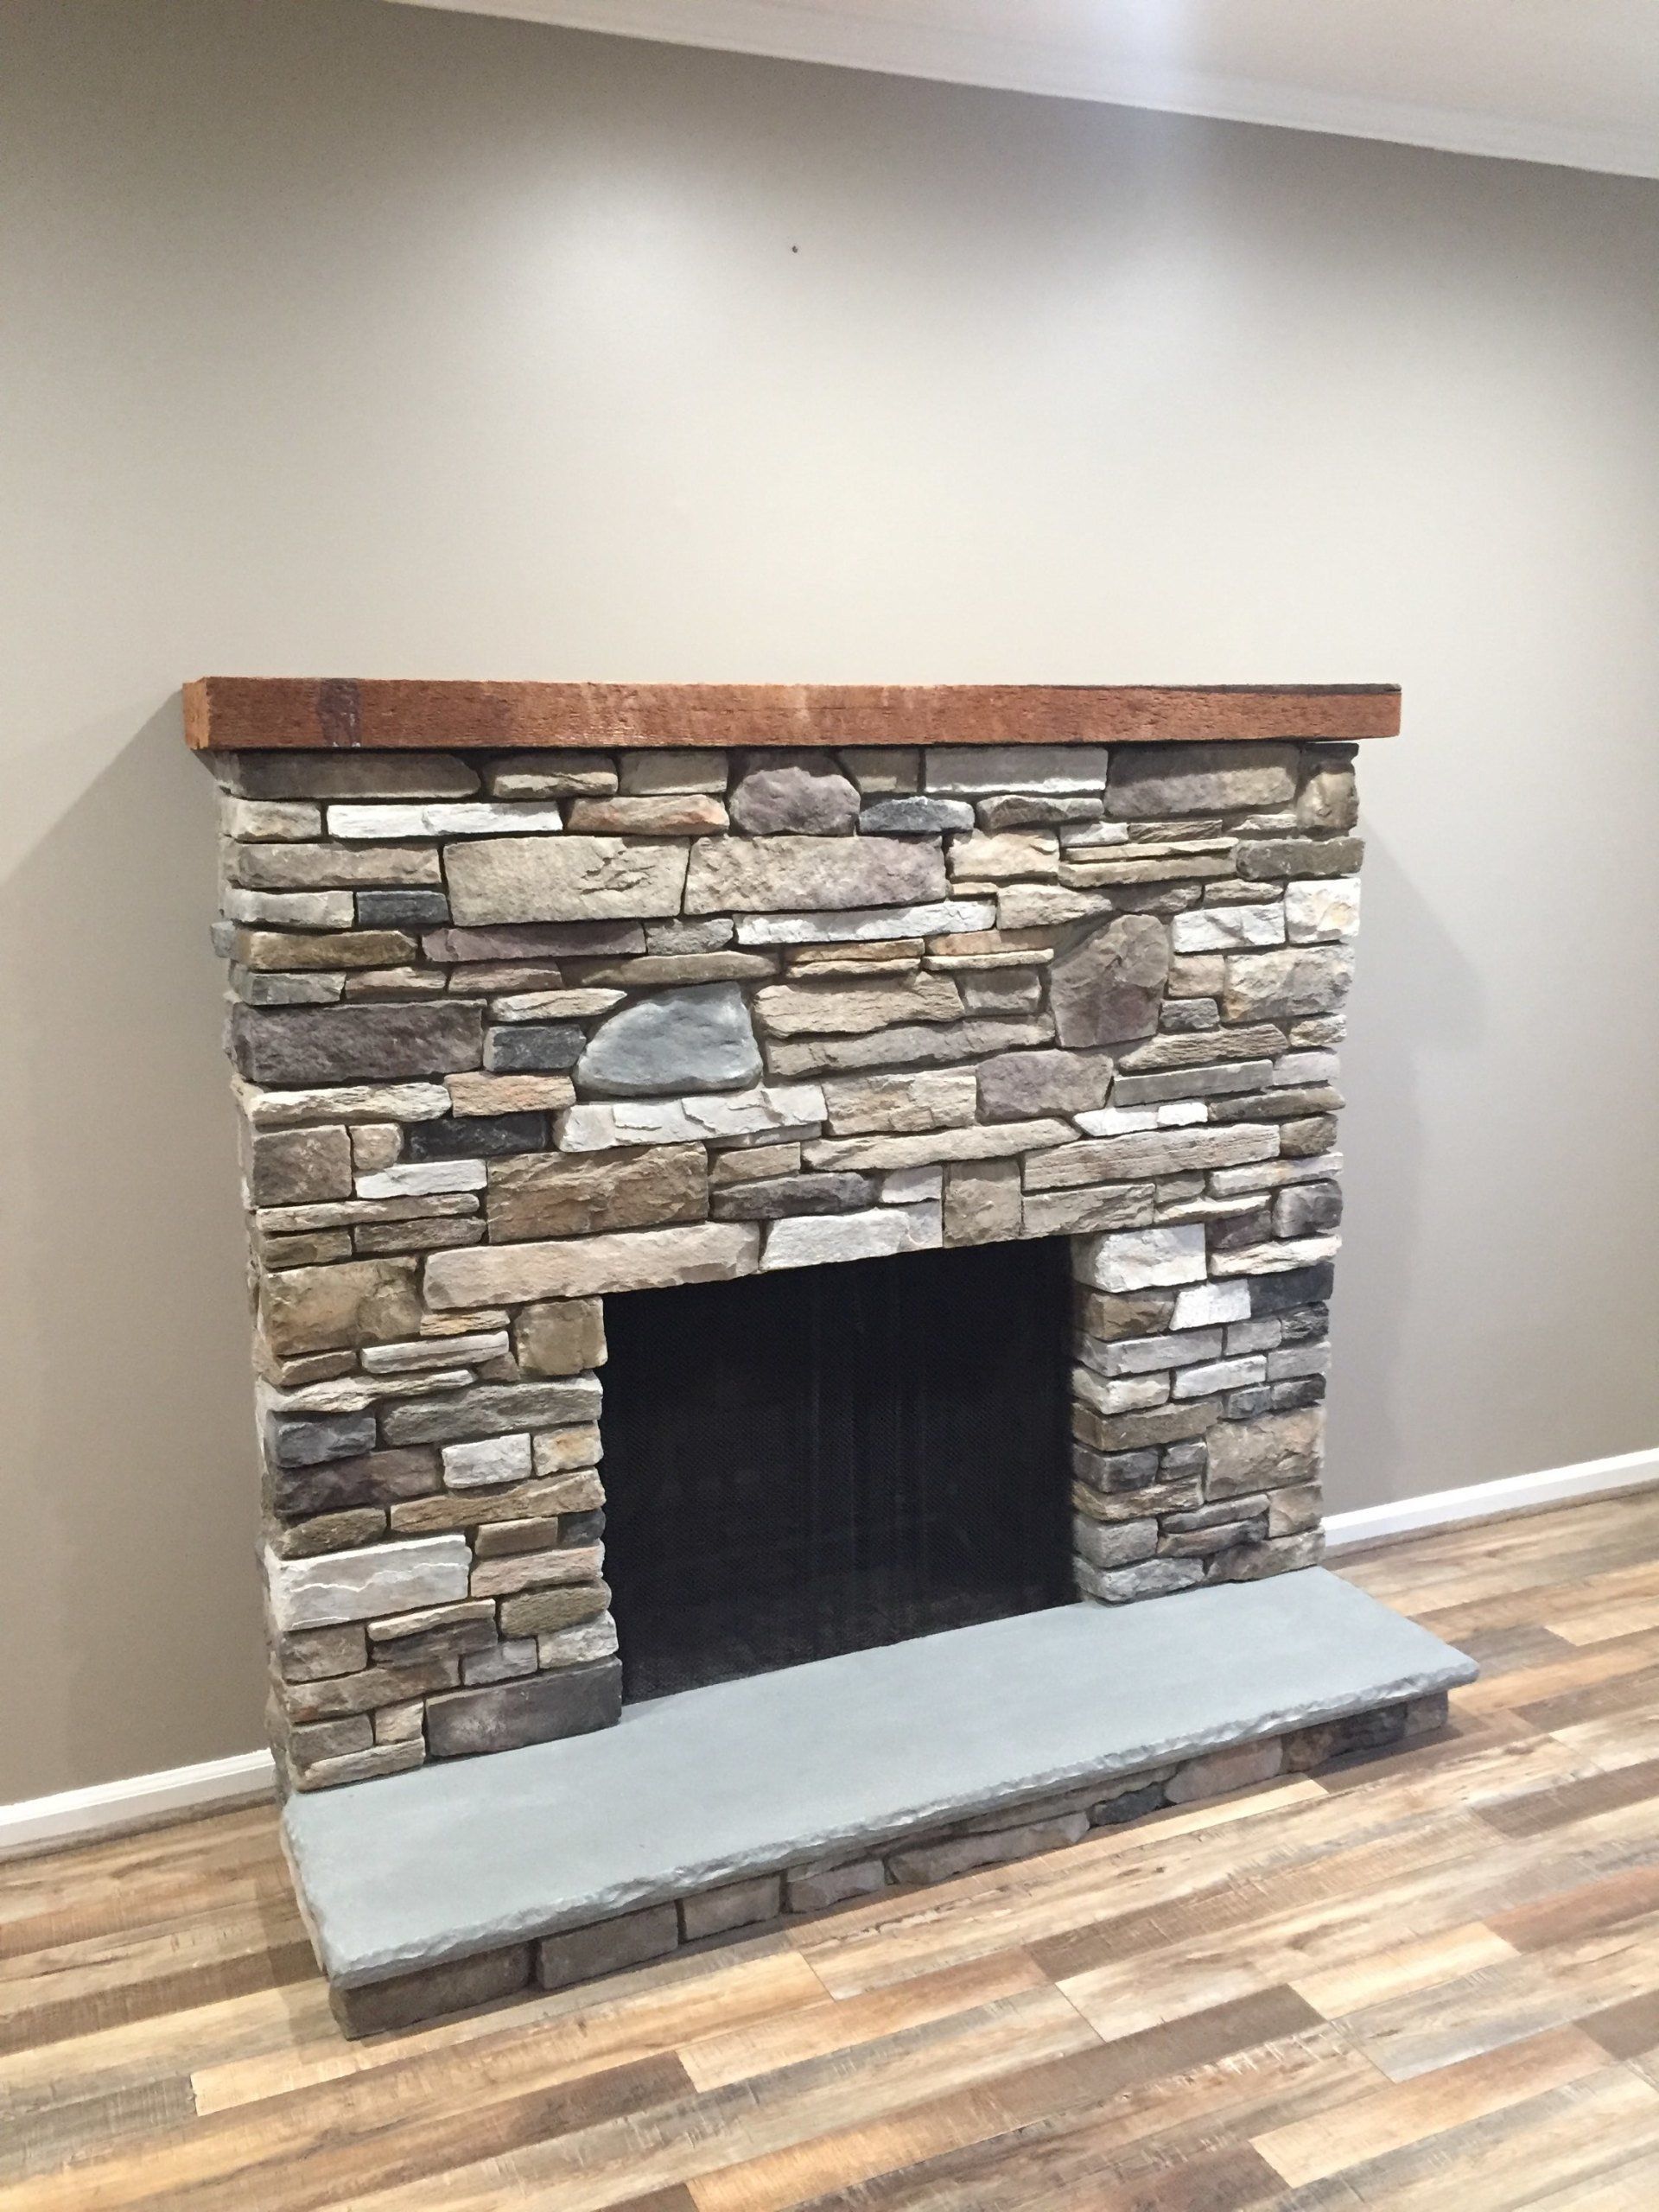 Hearth — Modern Fireplace With Brick Wall in Langhorne, PA